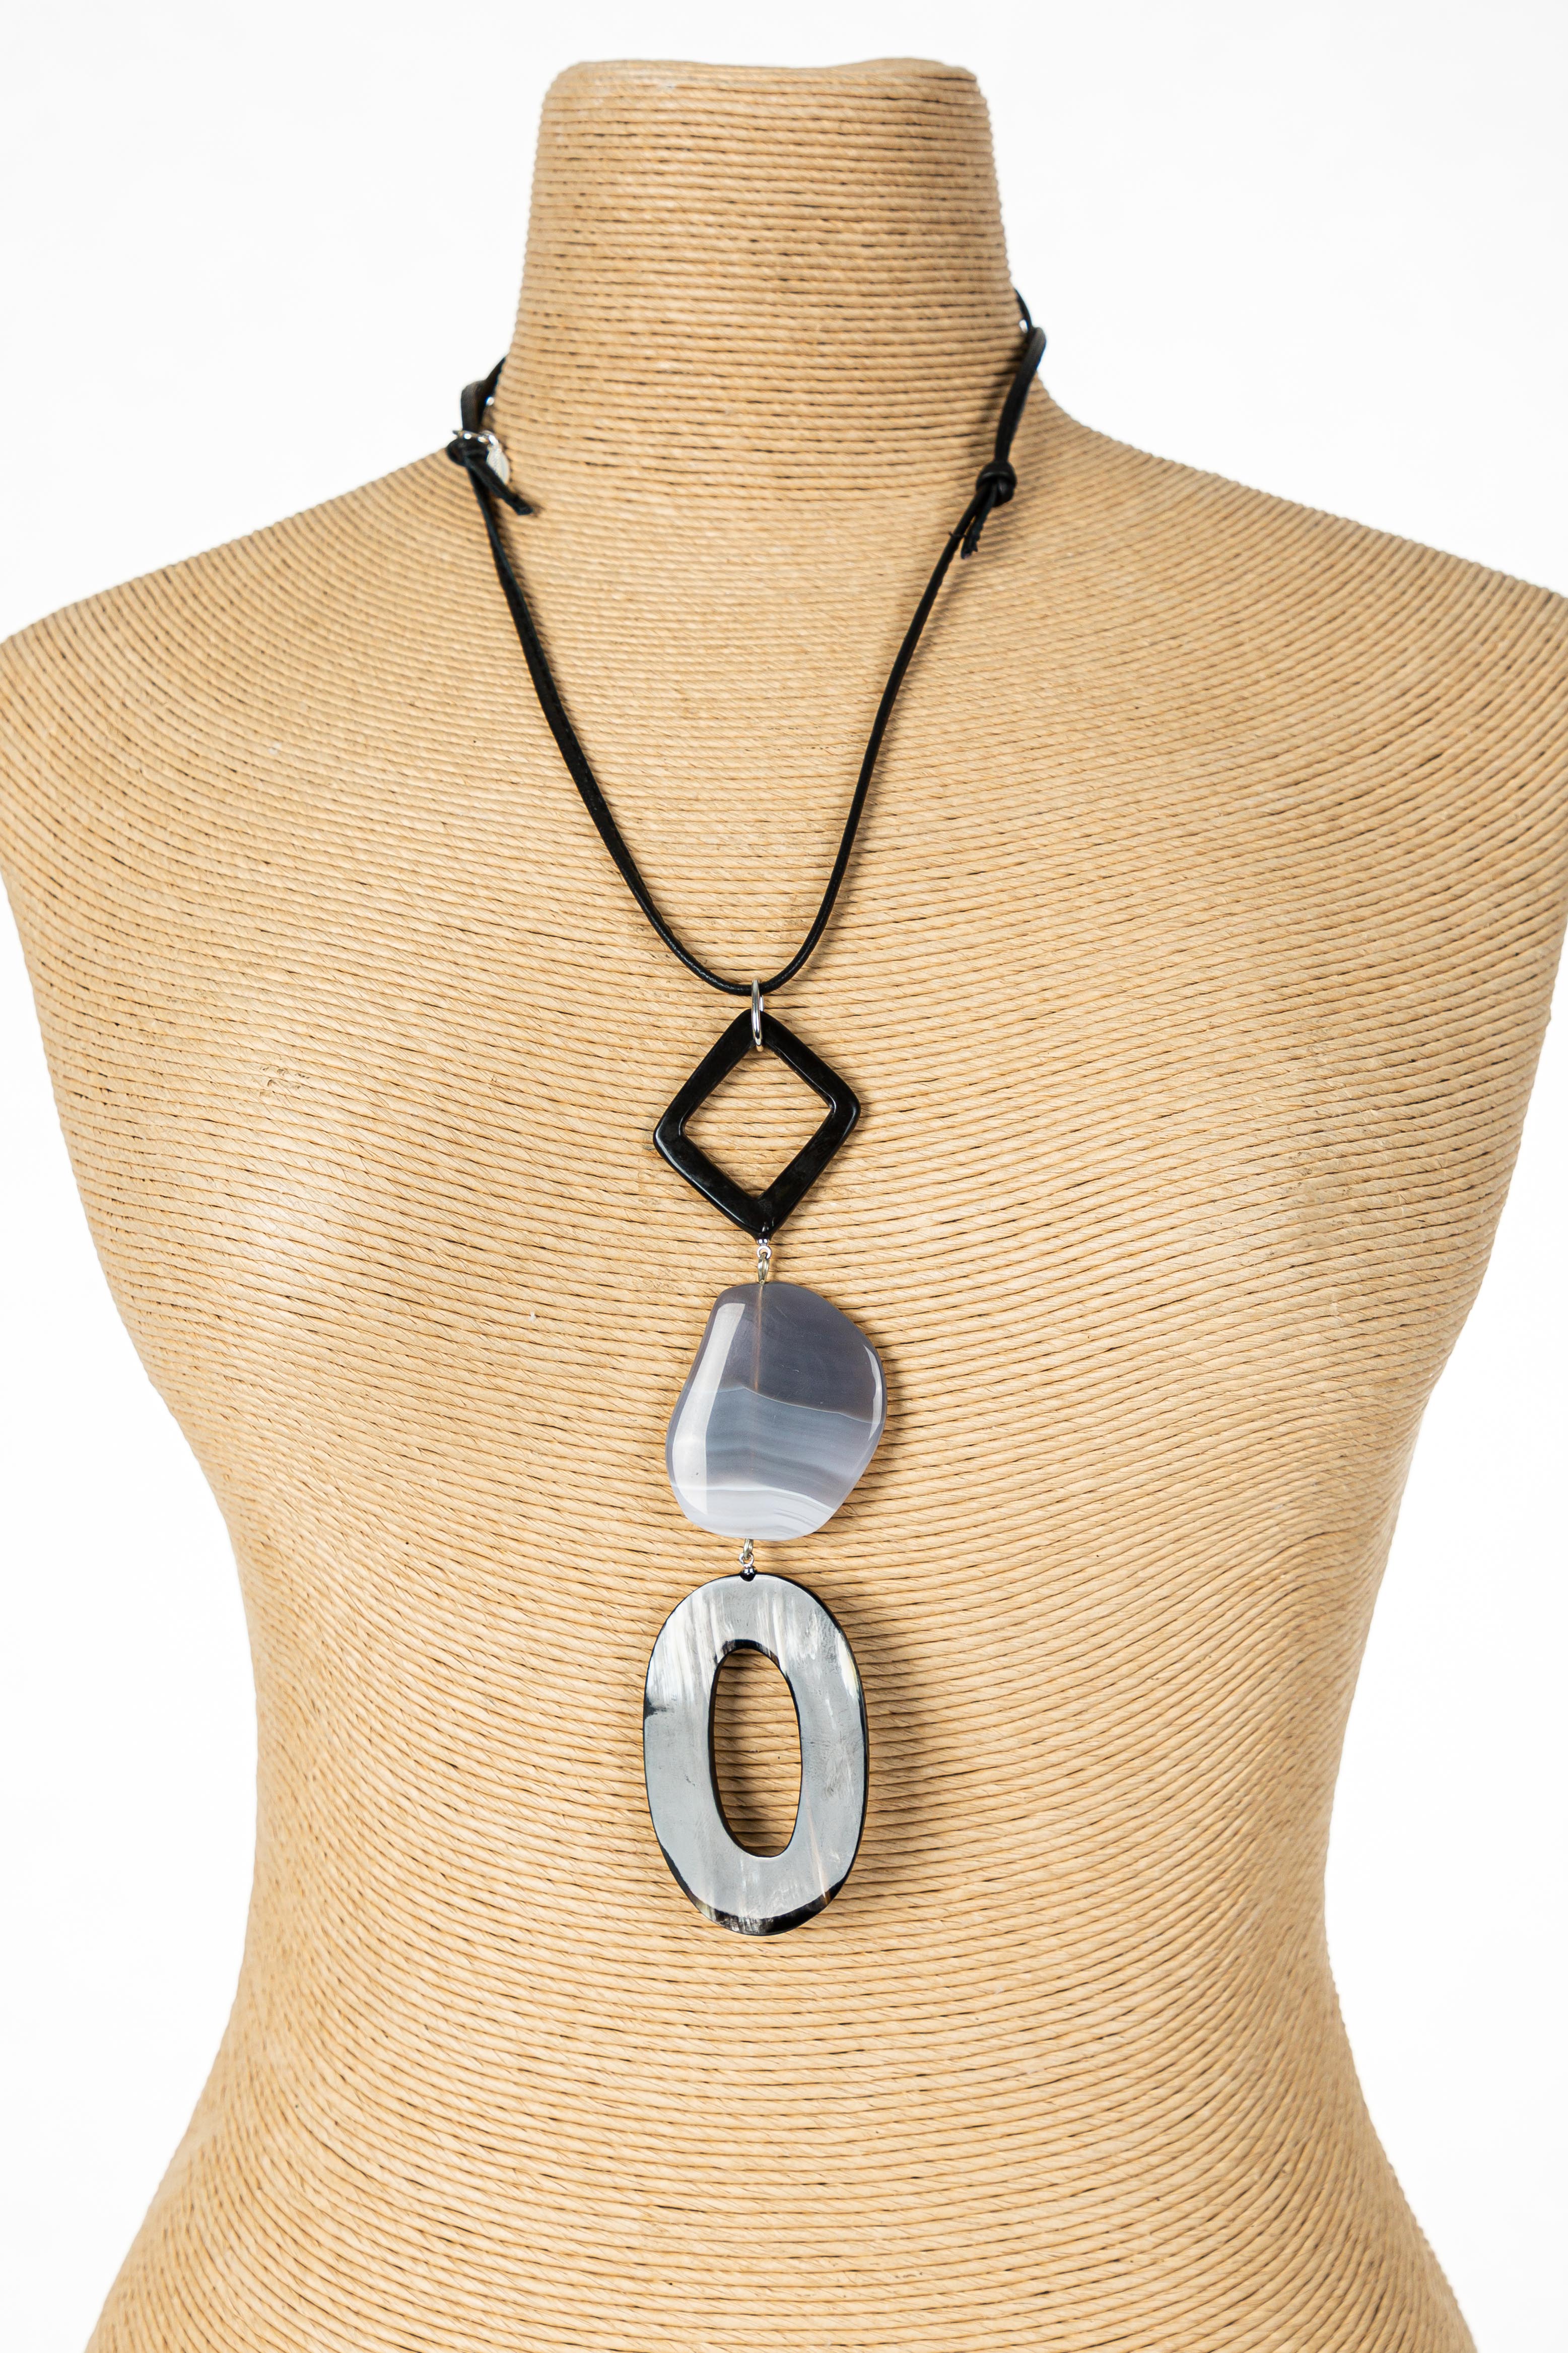 "Art Craft", Horn necklace, long necklace, black leather string and marble horn element